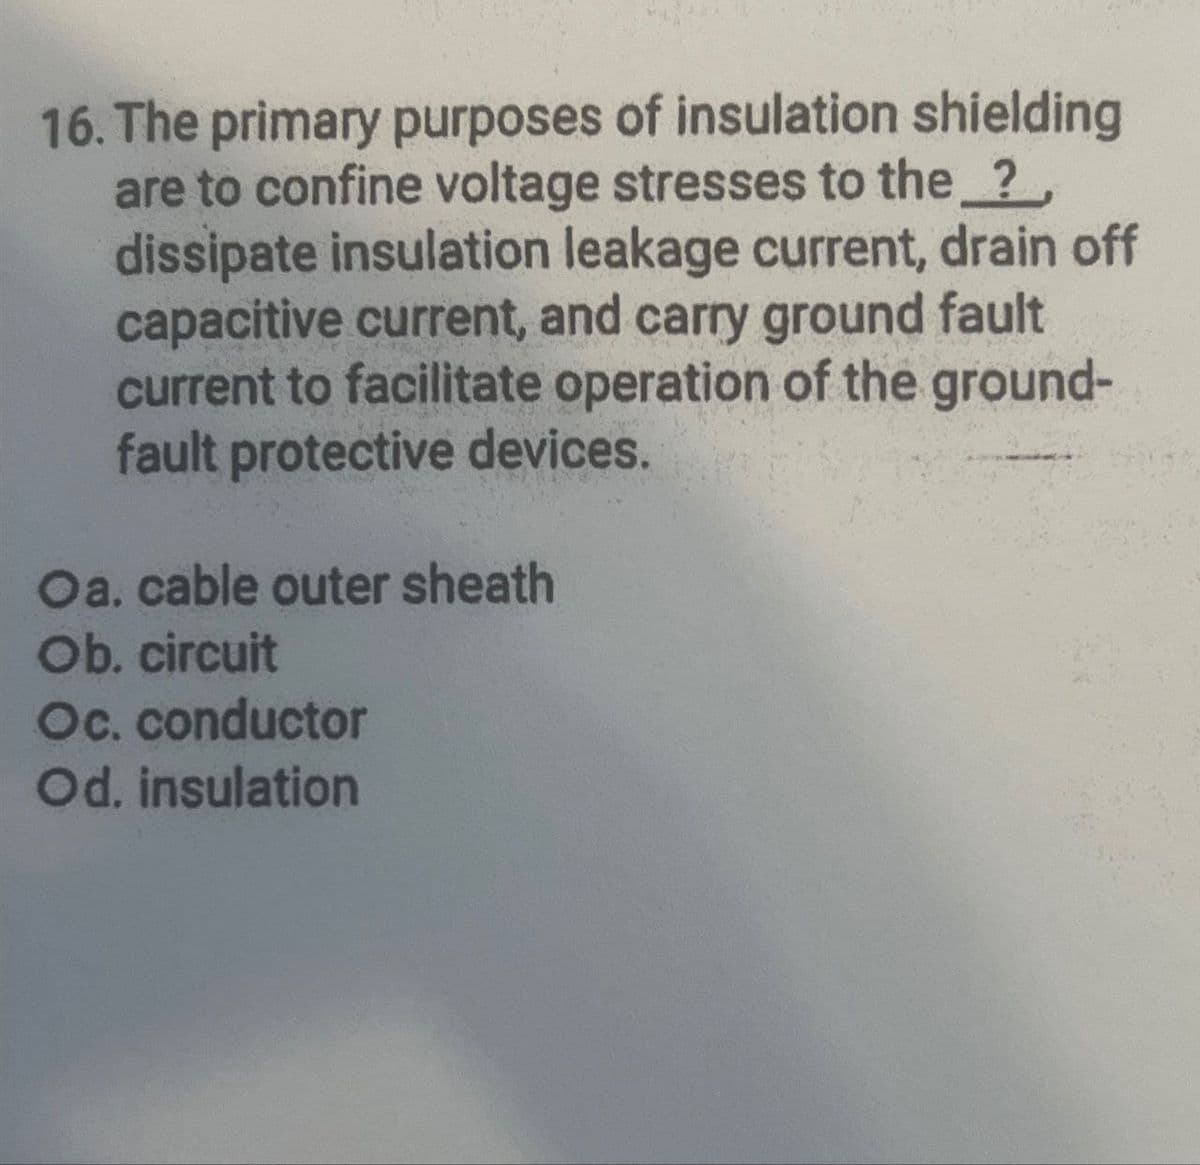 16. The primary purposes of insulation shielding
are to confine voltage stresses to the ?,
dissipate insulation leakage current, drain off
capacitive current, and carry ground fault
current to facilitate operation of the ground-
fault protective devices.
Oa. cable outer sheath
Ob. circuit
Oc. conductor
Od. insulation